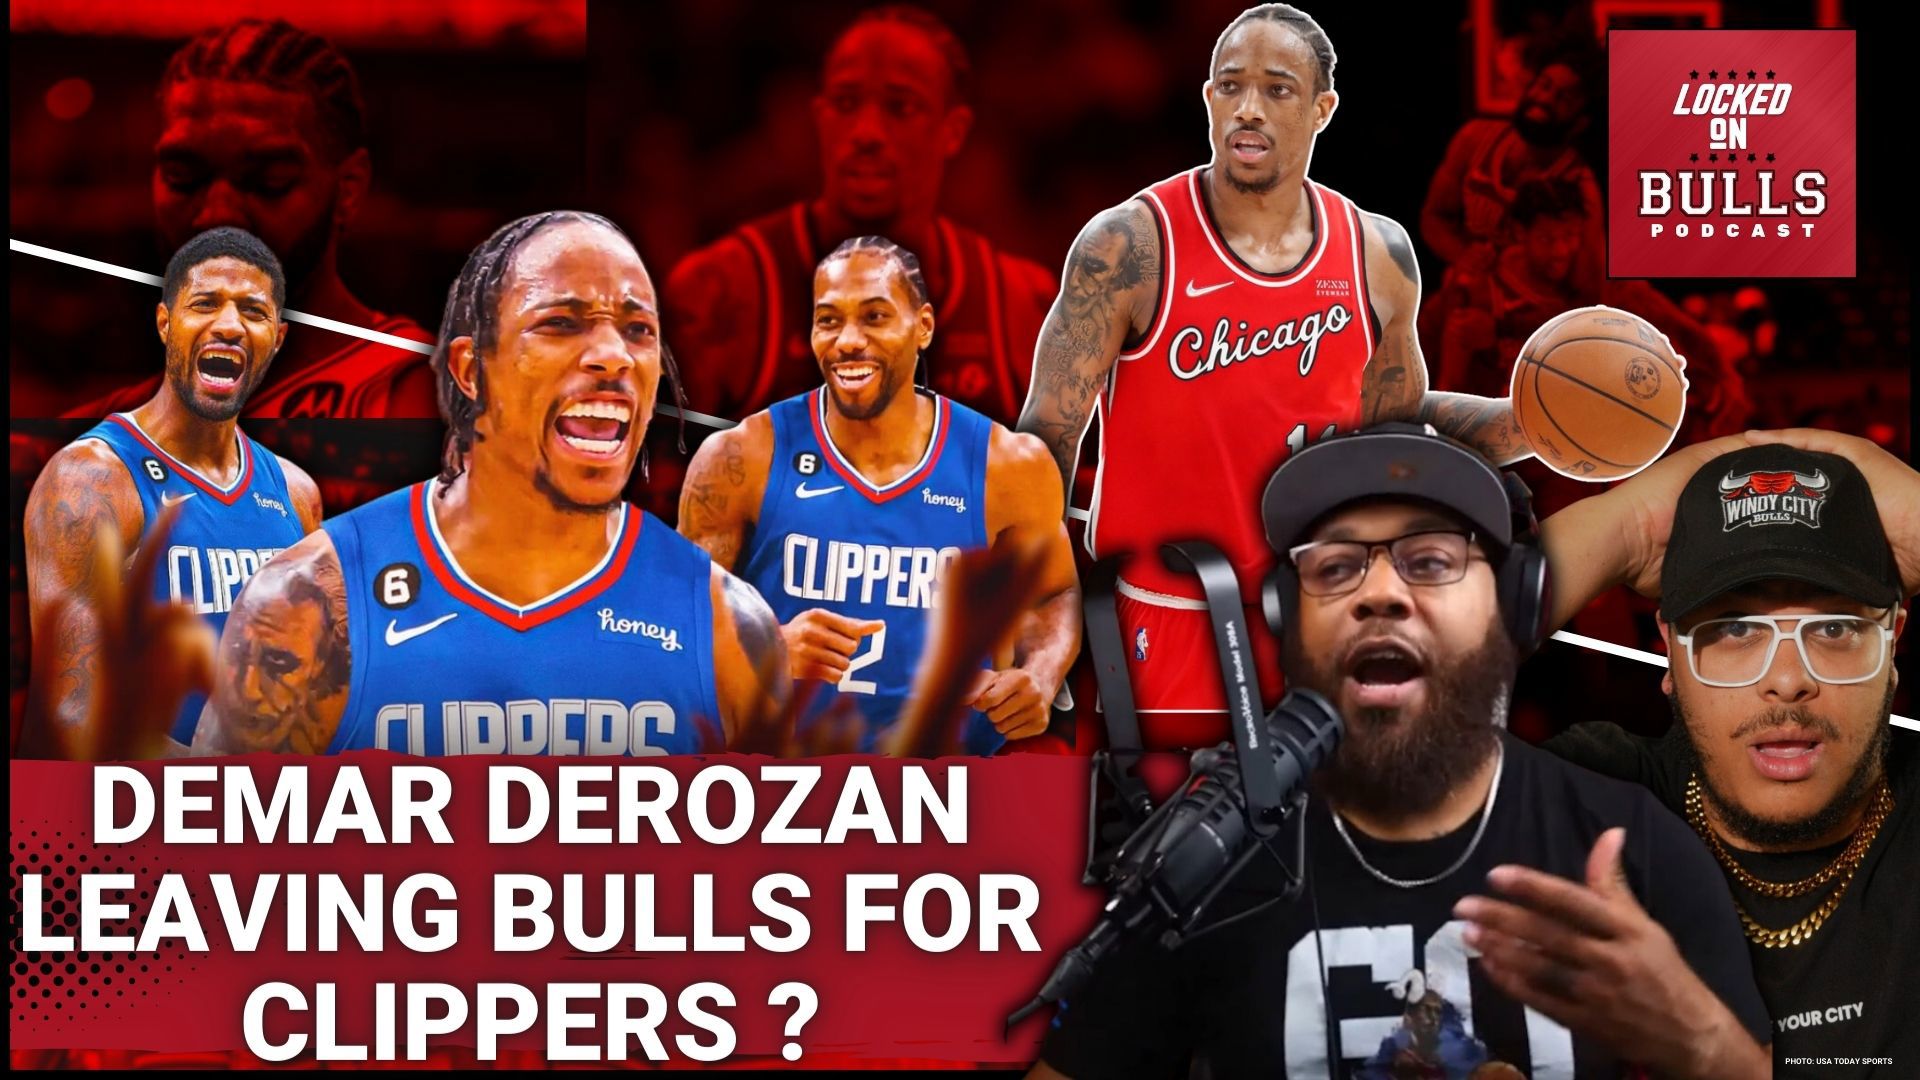 Haize & pat The Designer discuss rumors of the Clippers being interested in DeMar DeRozan. The guys also talk about Chris Paul rumored to want to join the Bulls & mo